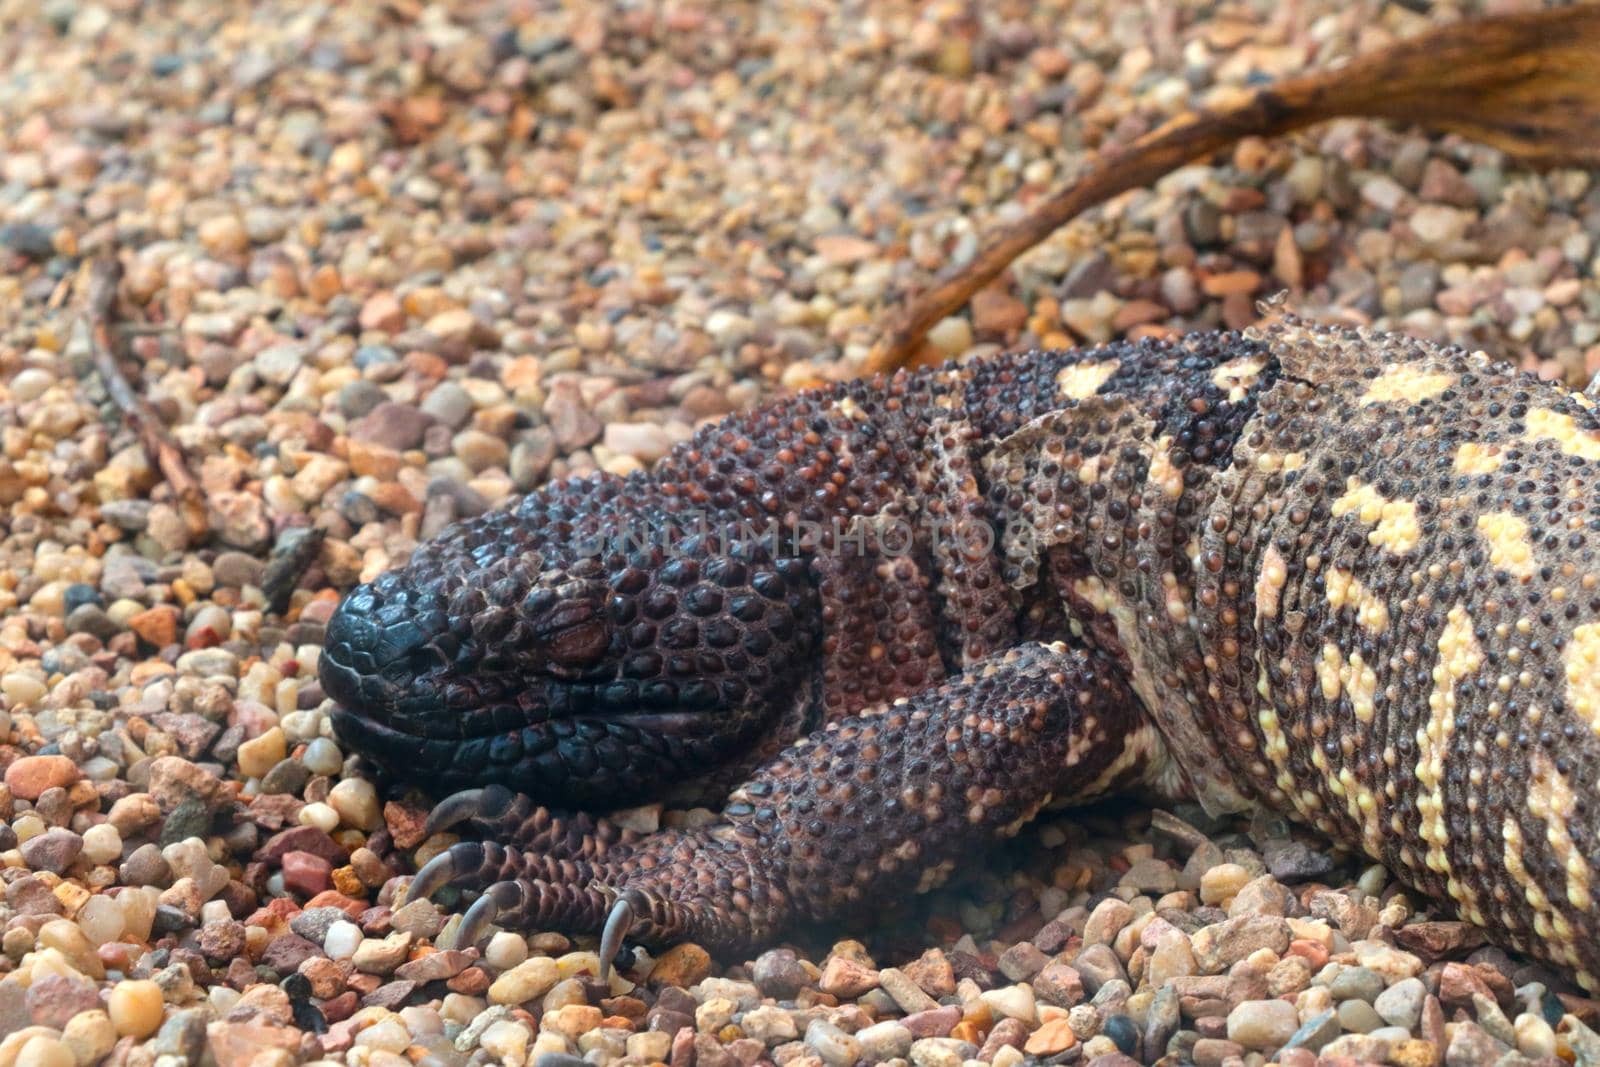 The Arizona gilatooth or vest is a poisonous lizard of the gilatooth family